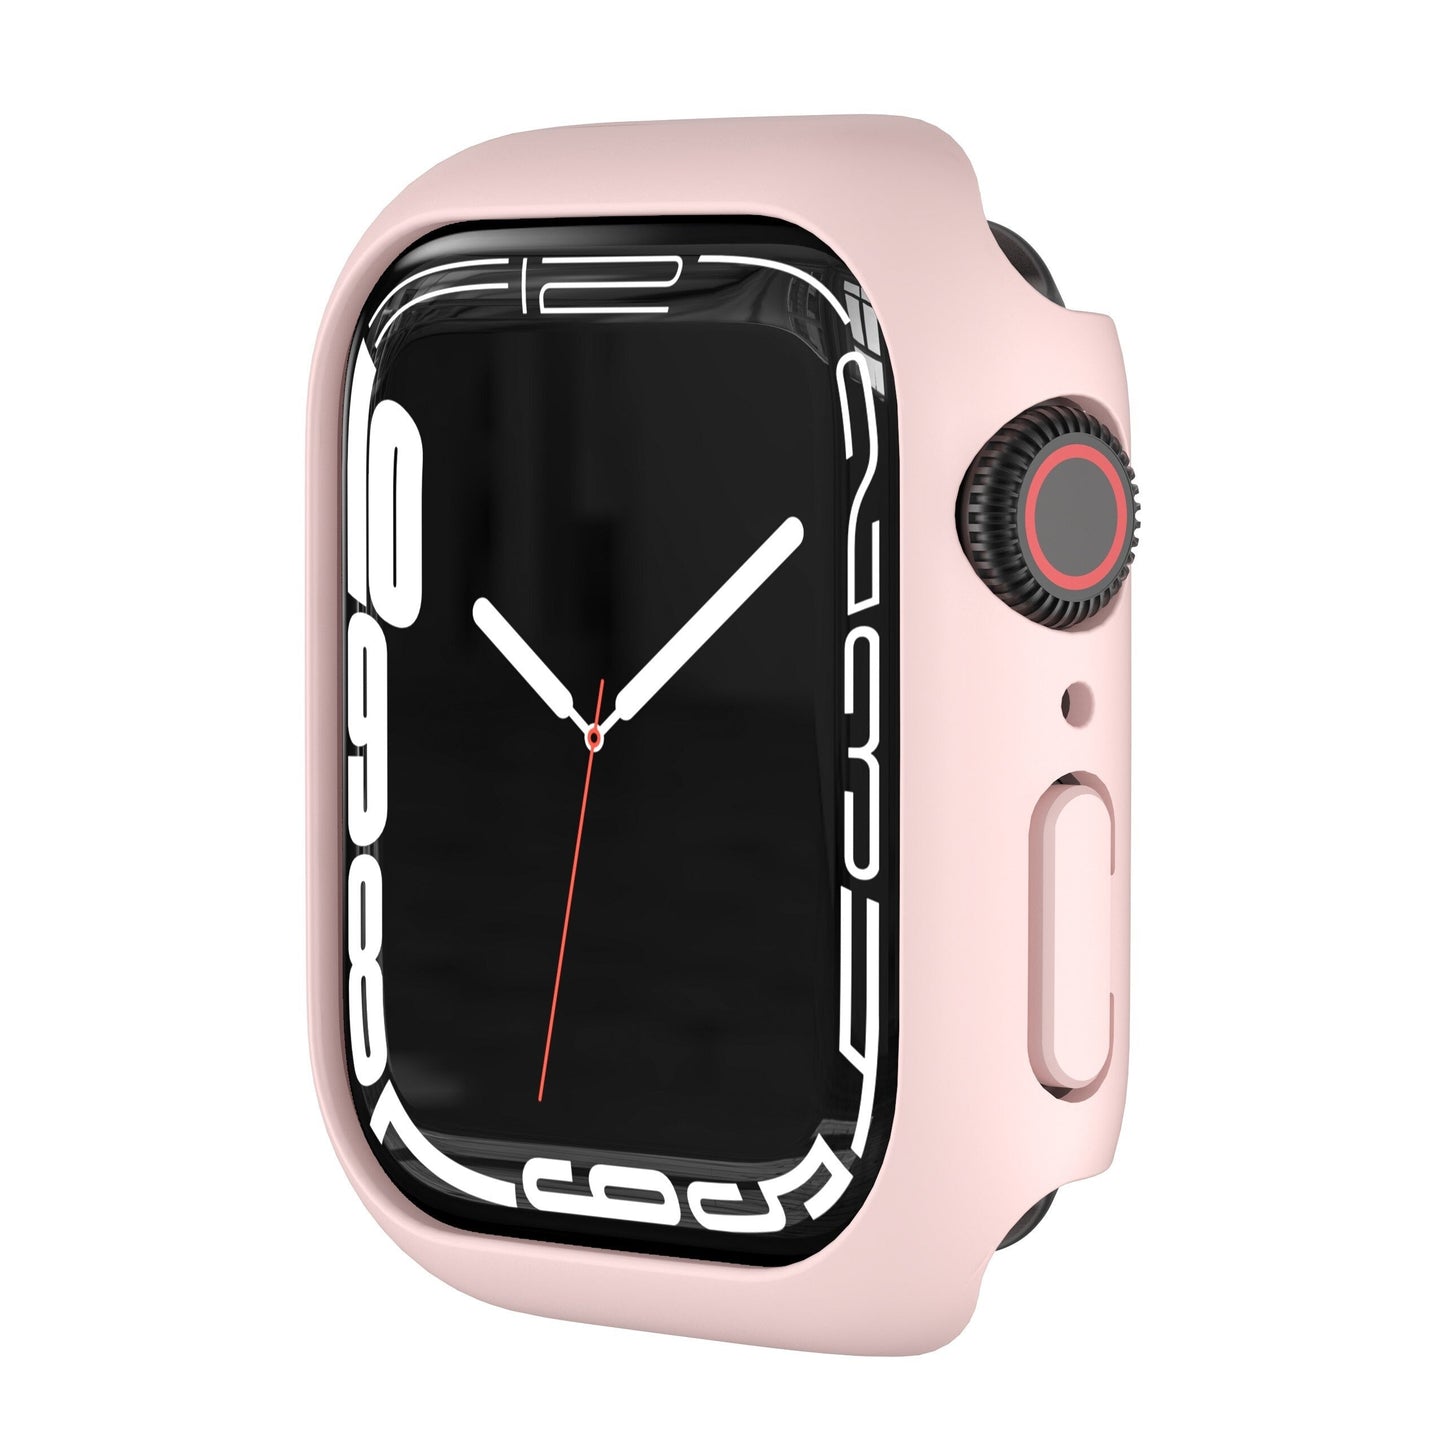 Premium Hard PC Ultra-Thin Protective Case By iSerieshub Compatible For Smartwatch